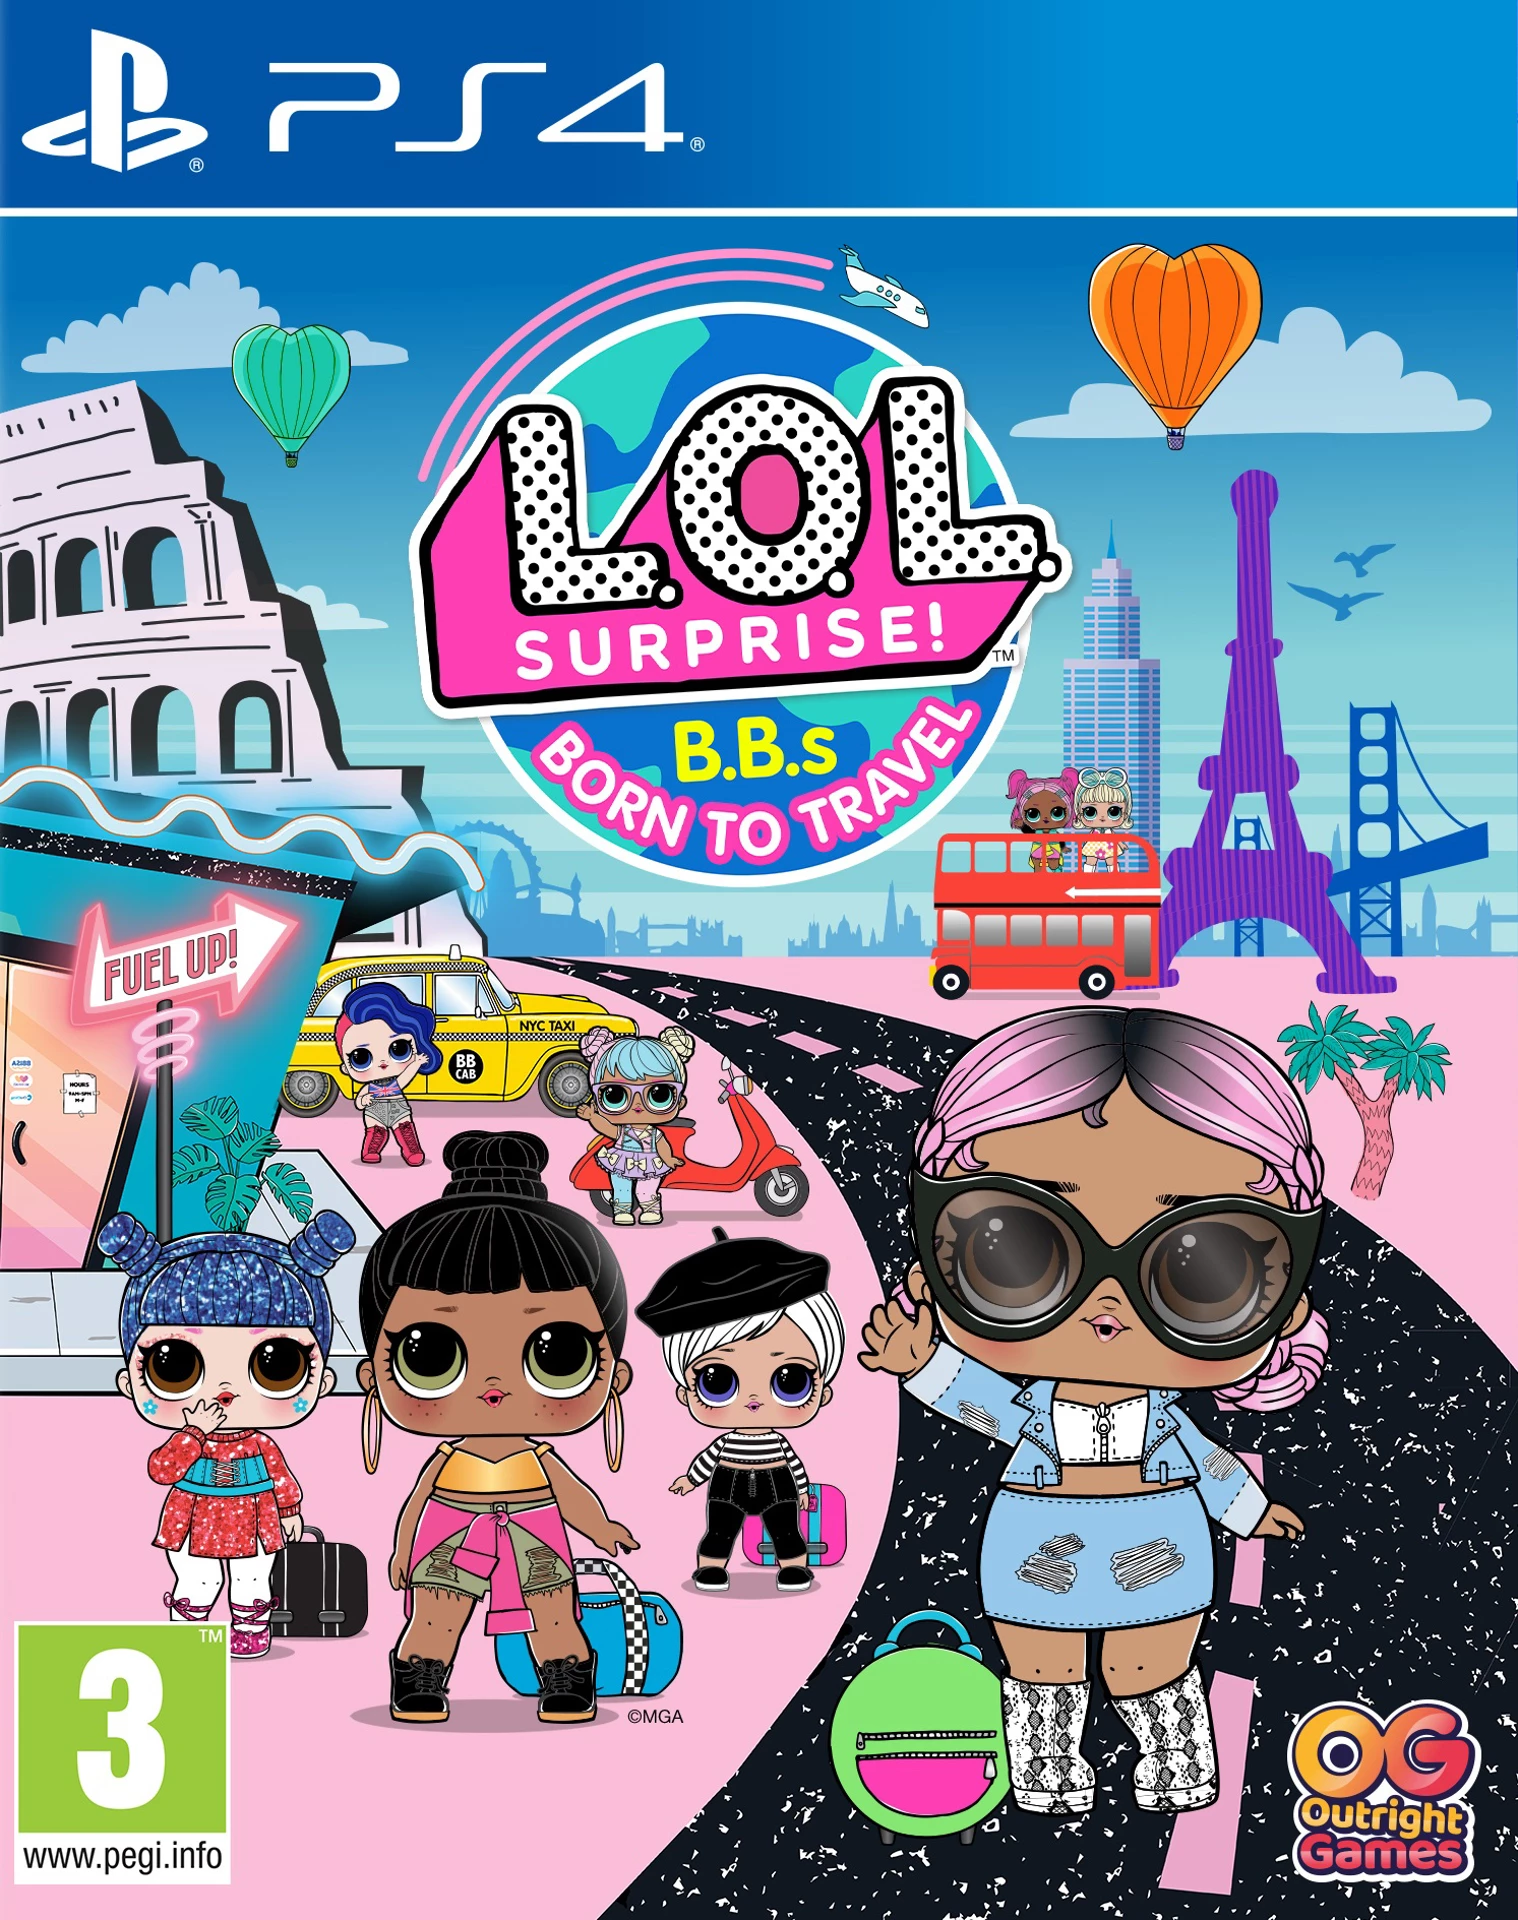 L.O.L. Surprise! B.B.s Born to Travel (PS4), Outright Games